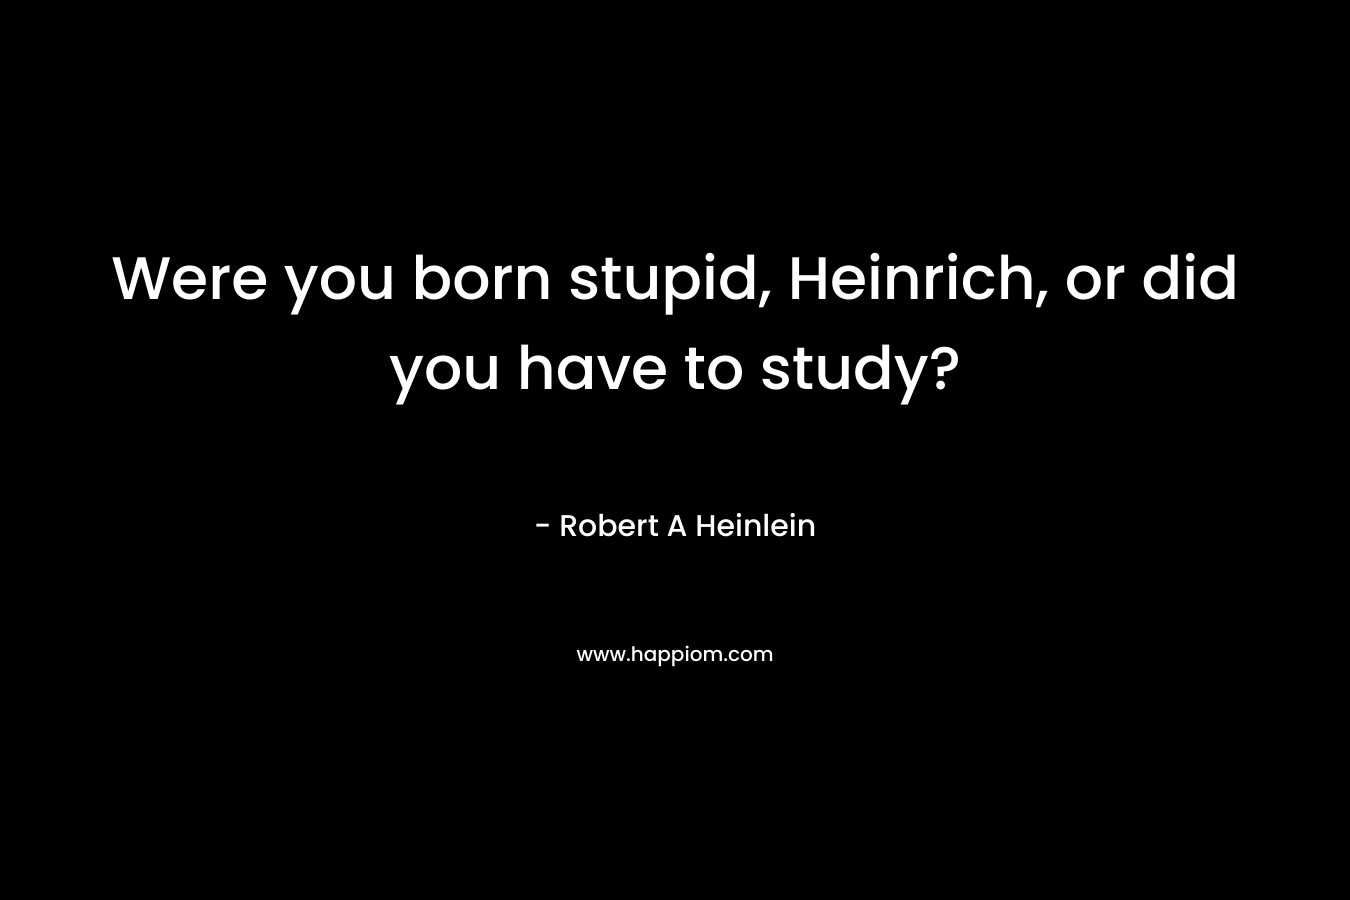 Were you born stupid, Heinrich, or did you have to study?